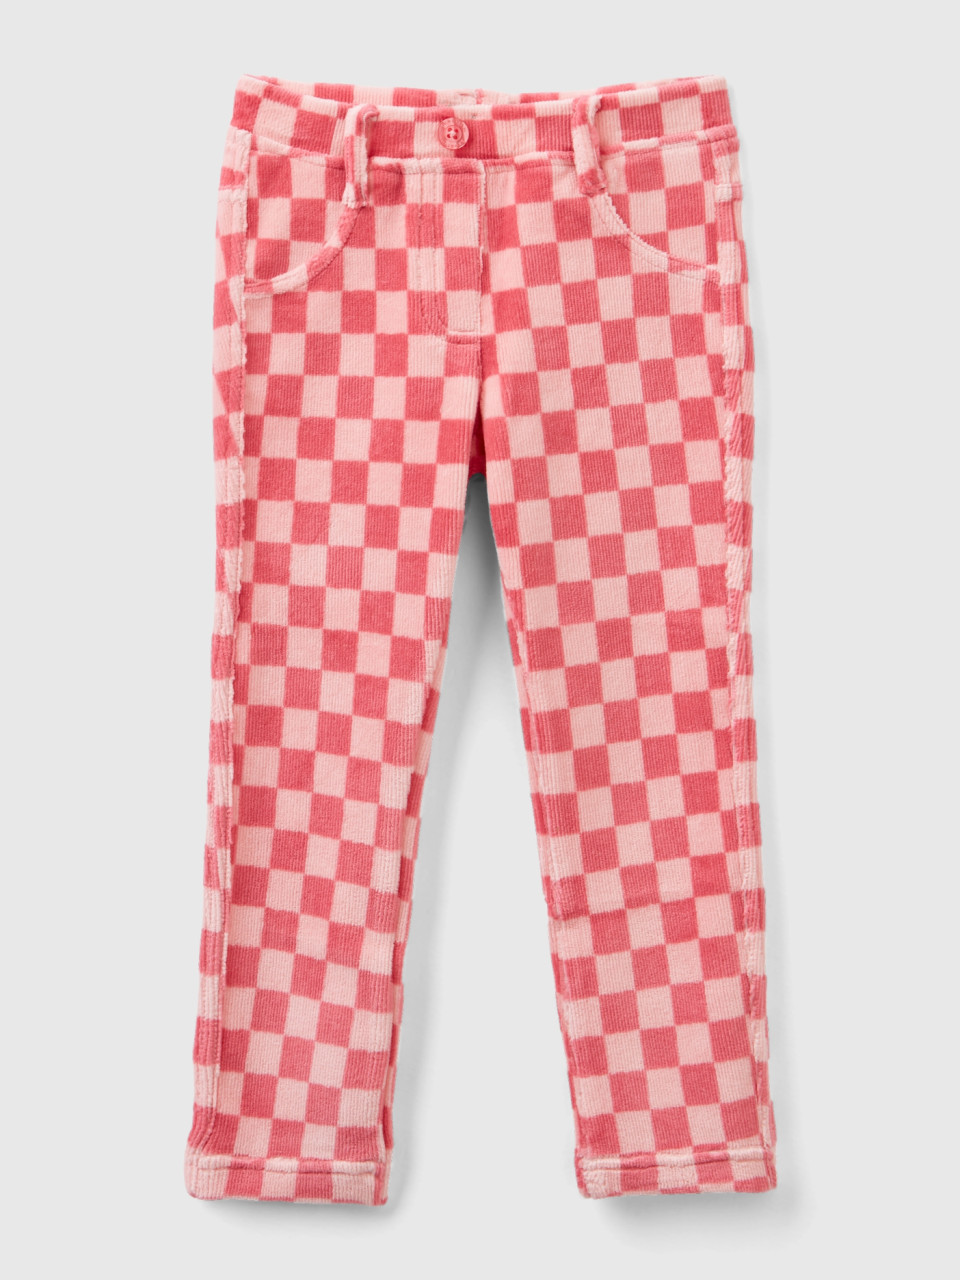 Benetton, Pink Jeggings With Checkered Print, Pink, Kids